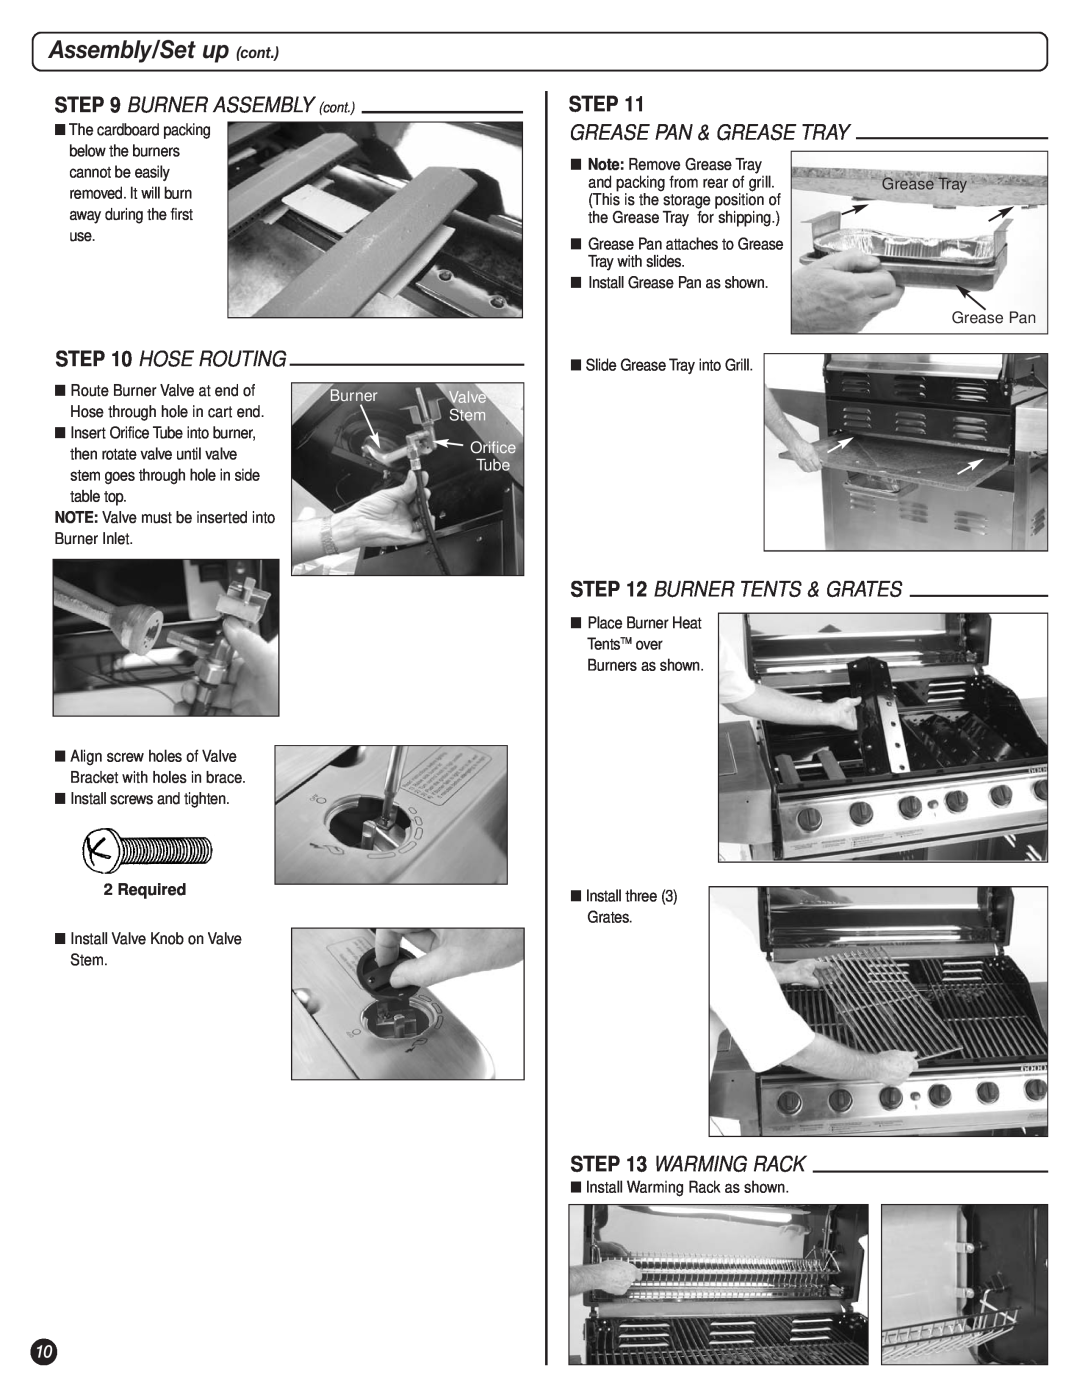 Coleman 9947A726 BURNER ASSEMBLY cont, Hose Routing, Grease Pan & Grease Tray, Burner Tents & Grates, Warming Rack, Step 